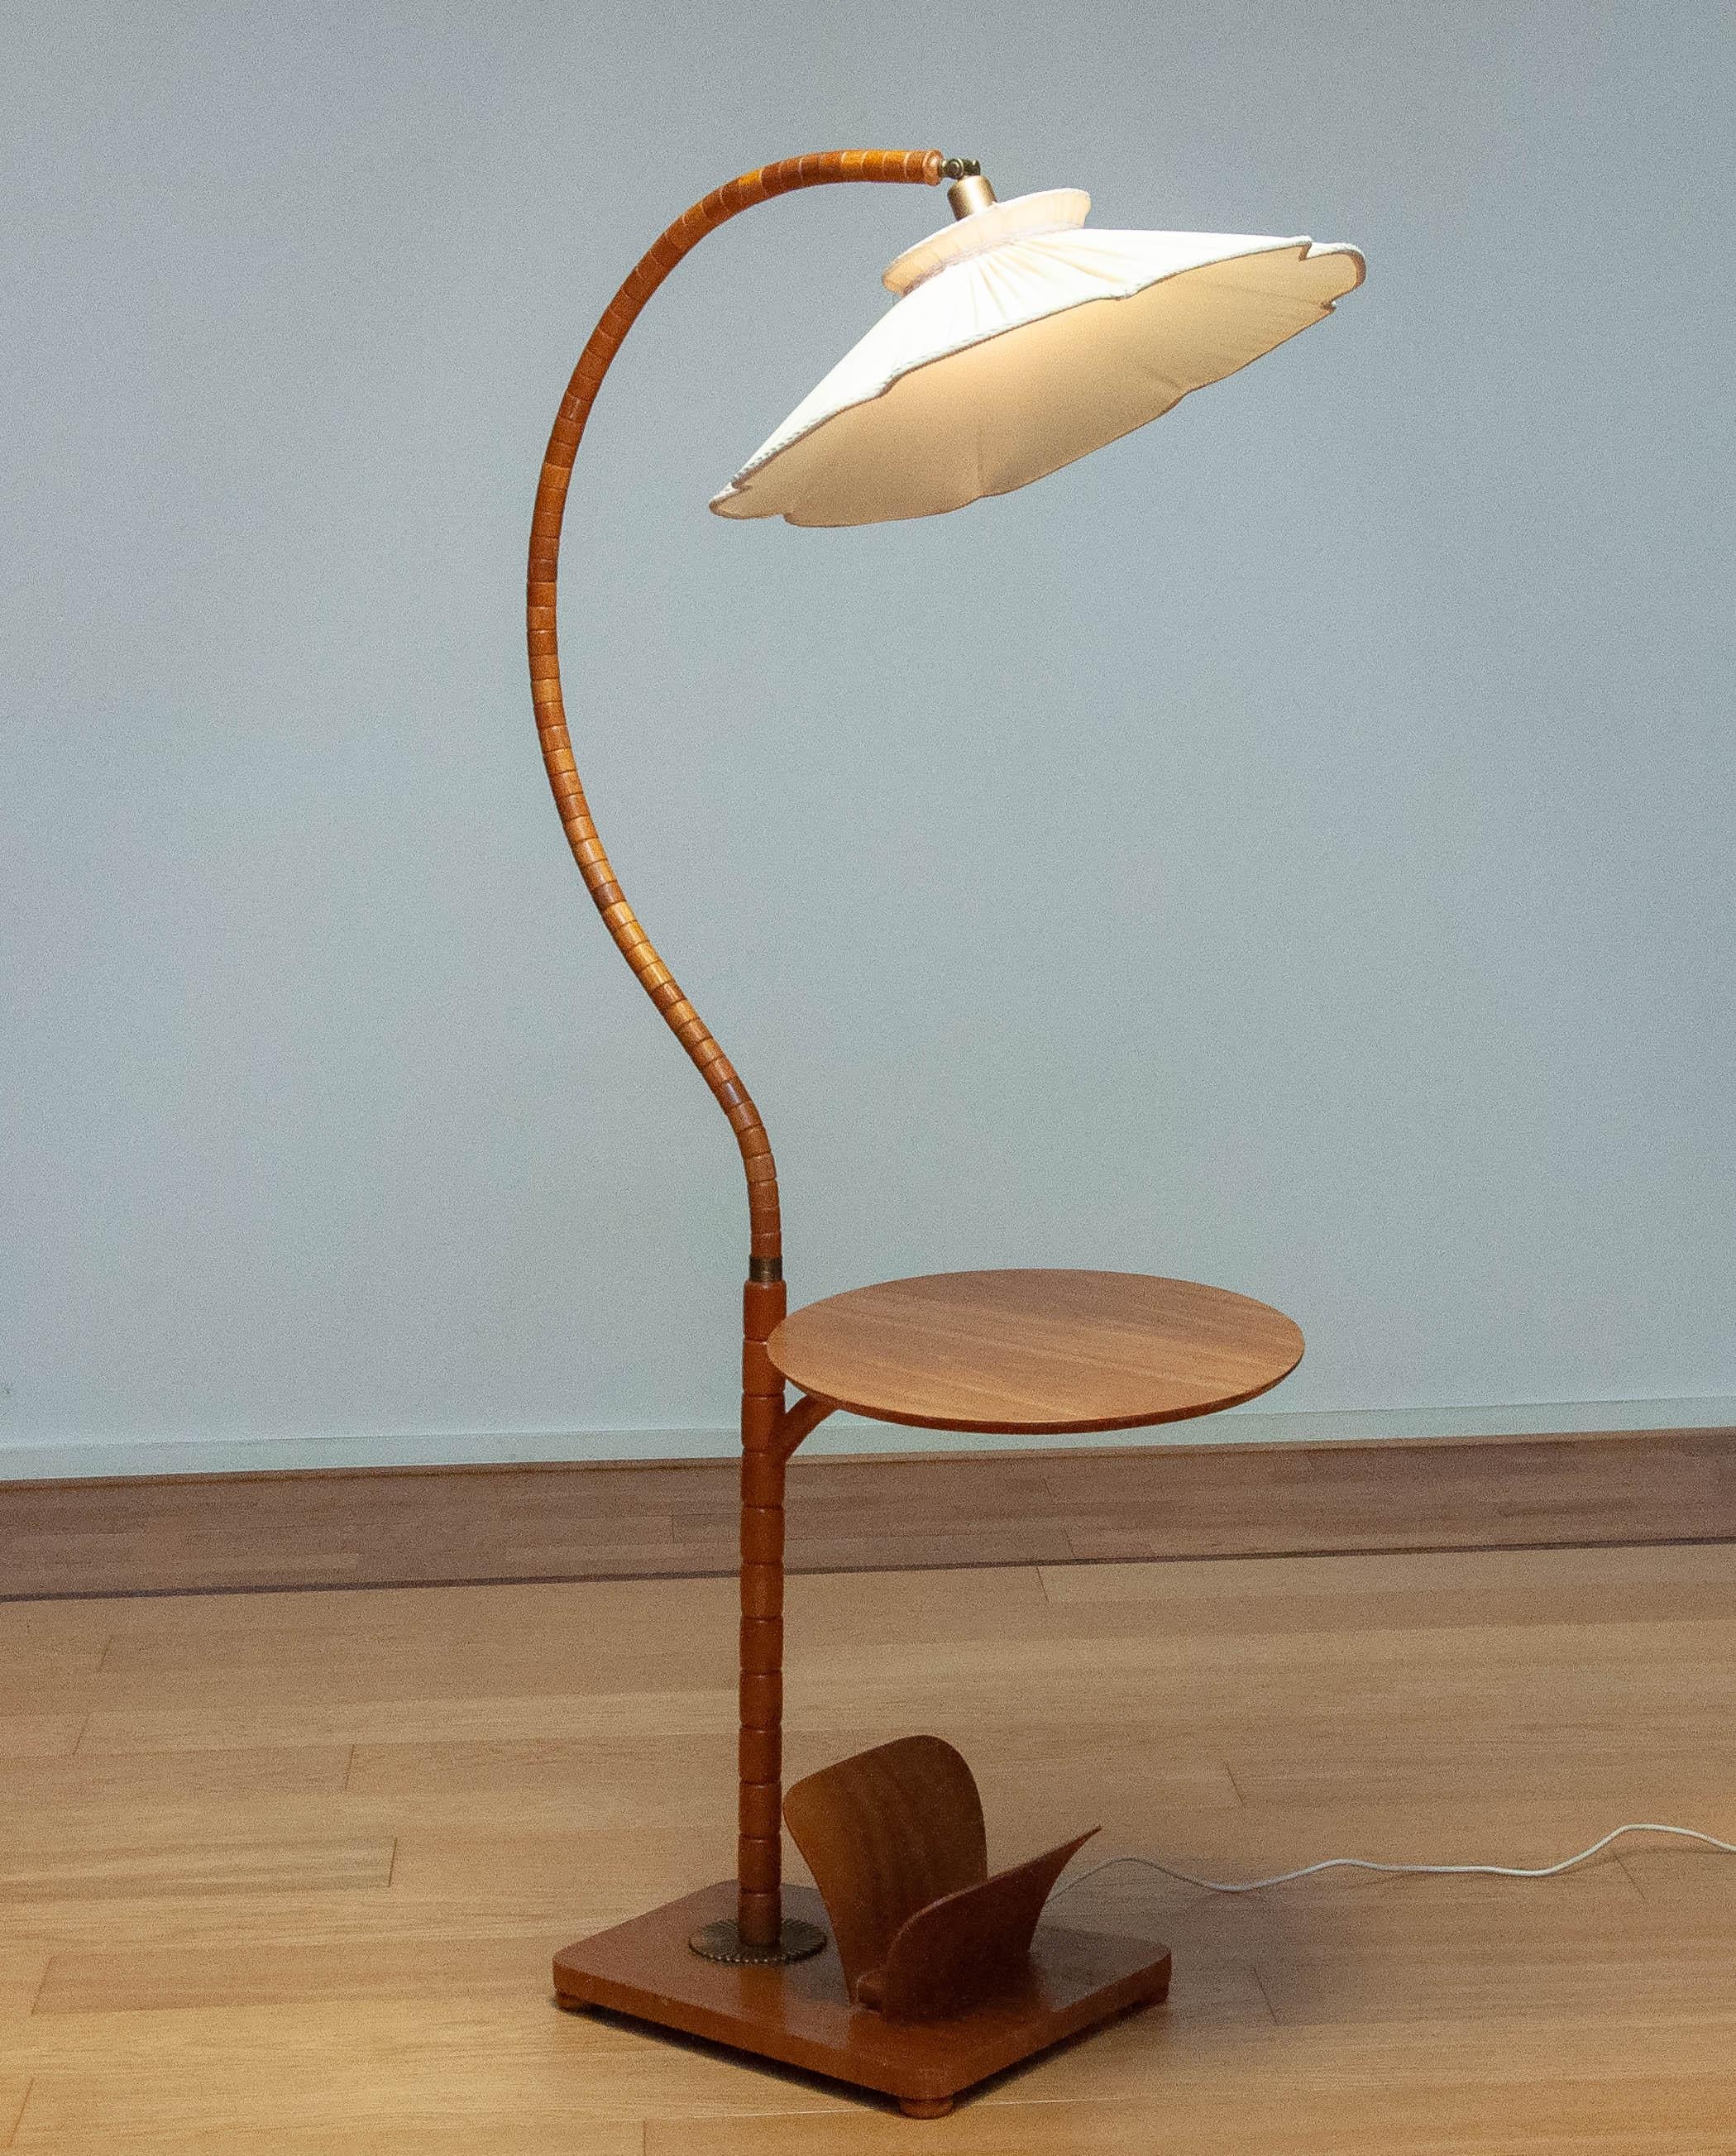 Mid-20th Century 1940s Swedish Art Nouveau Floor Lamp In Elm Wood And Elm Table By IWO Mariestad